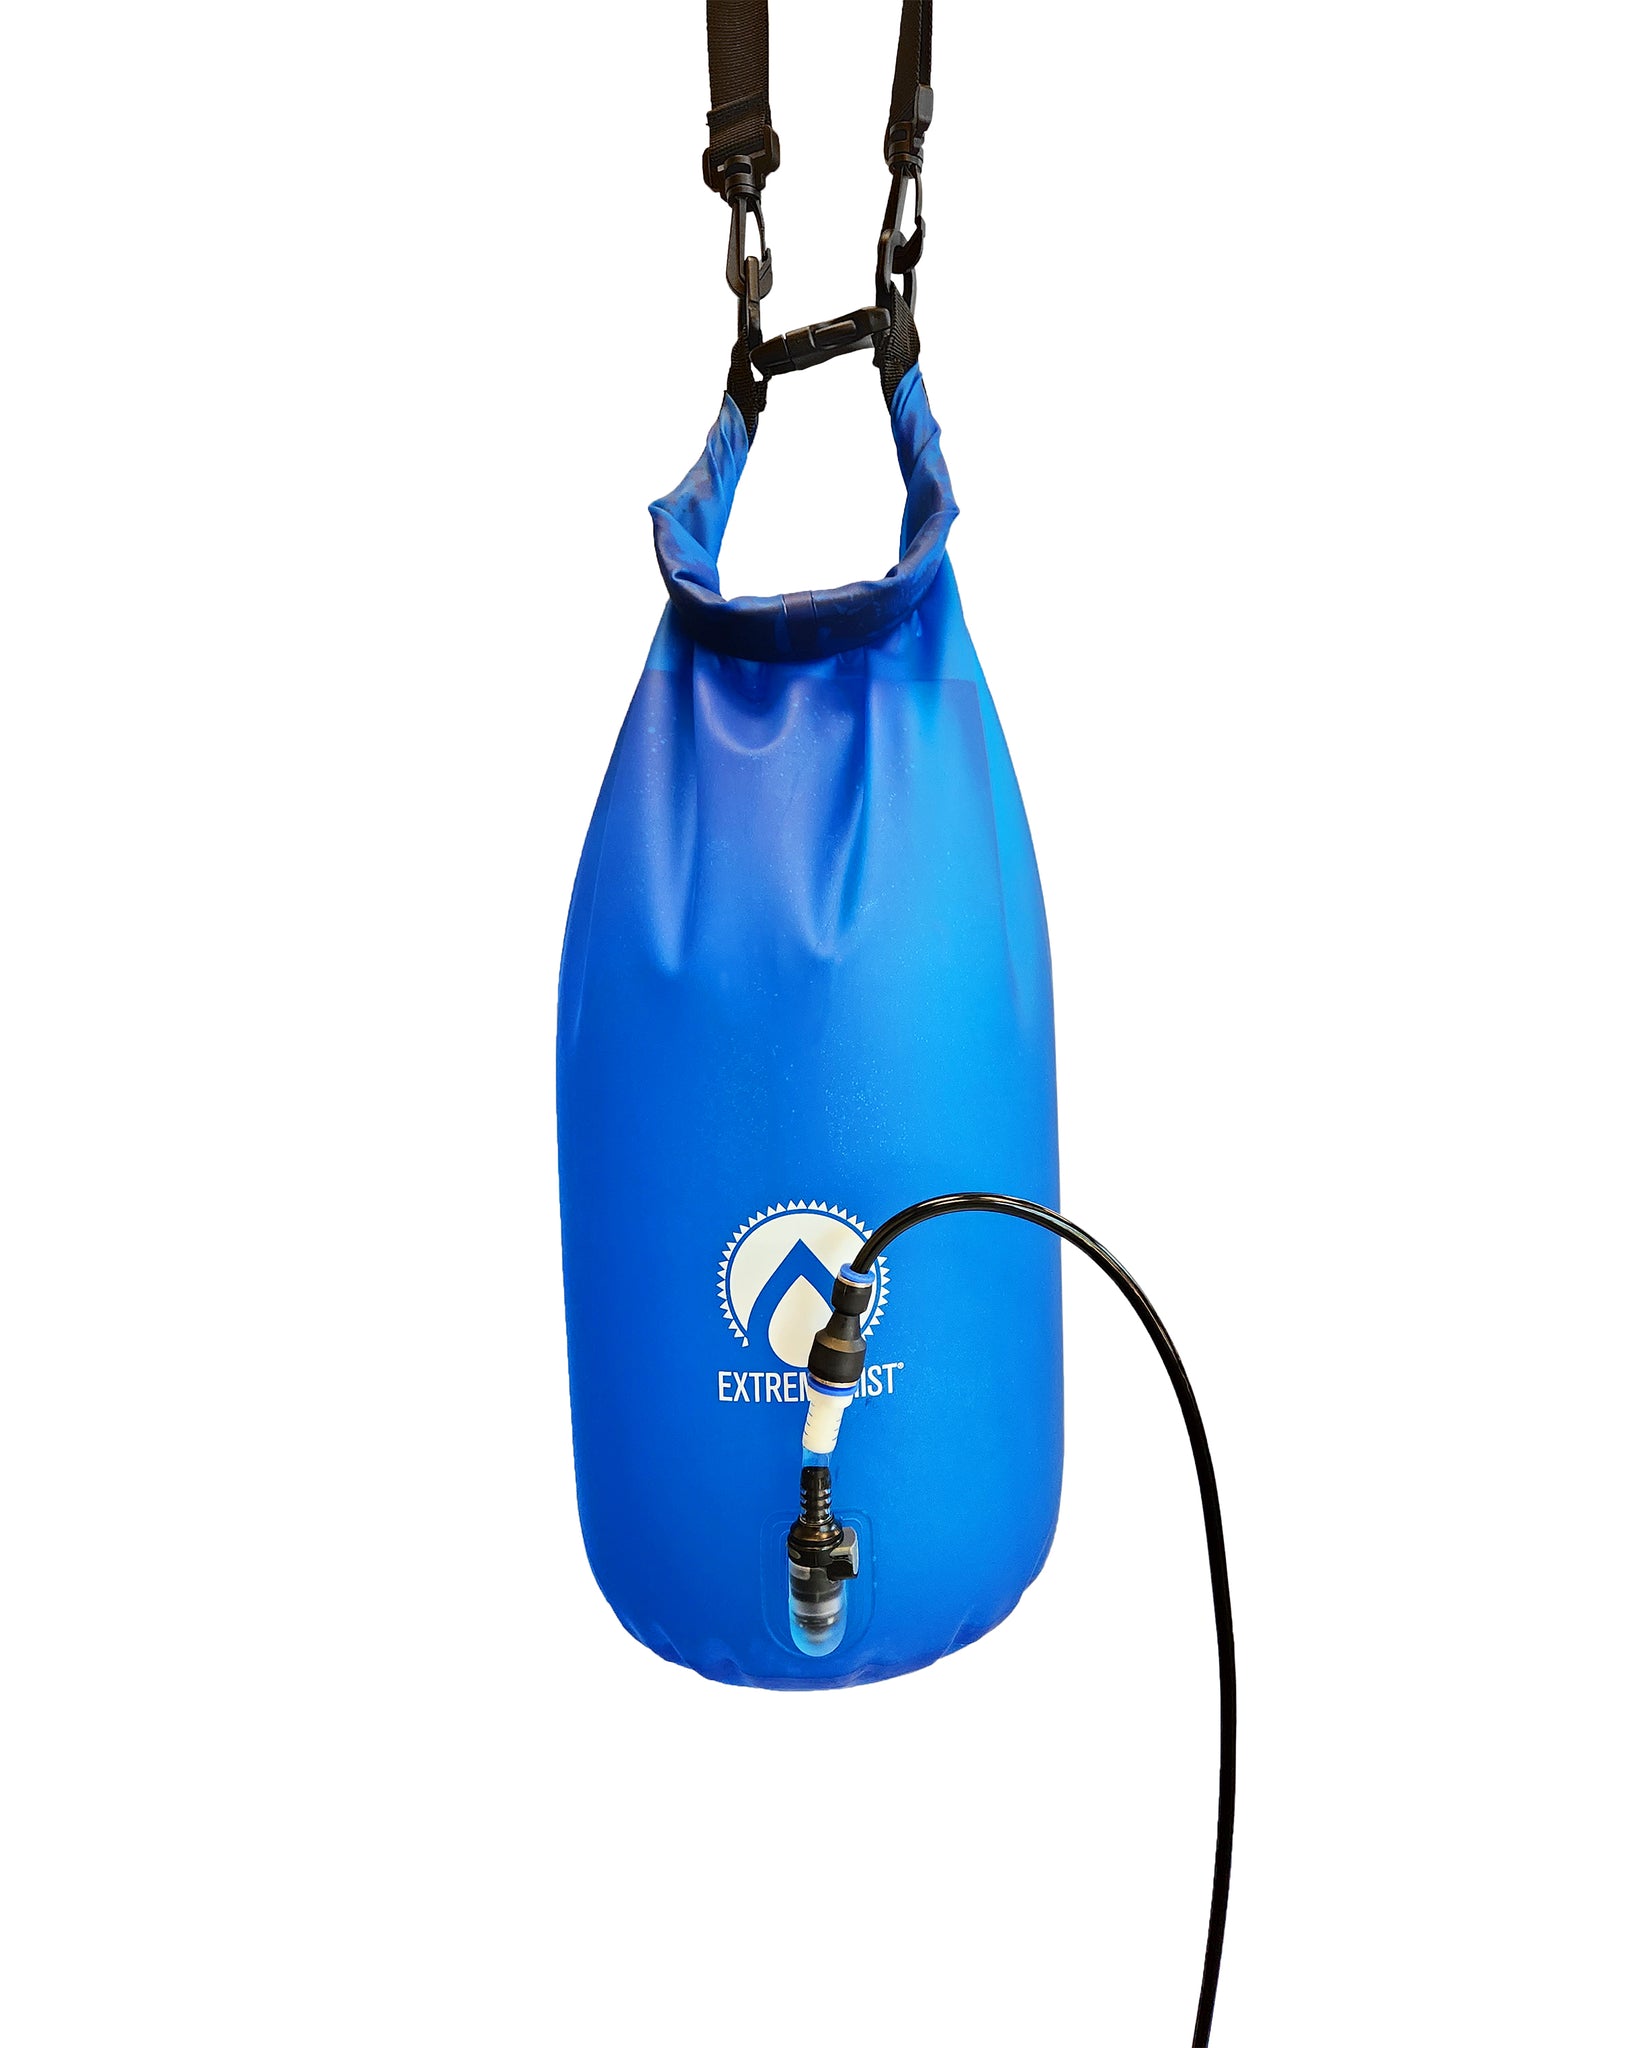 10 liter water container bag suspended from structure with misting line attached